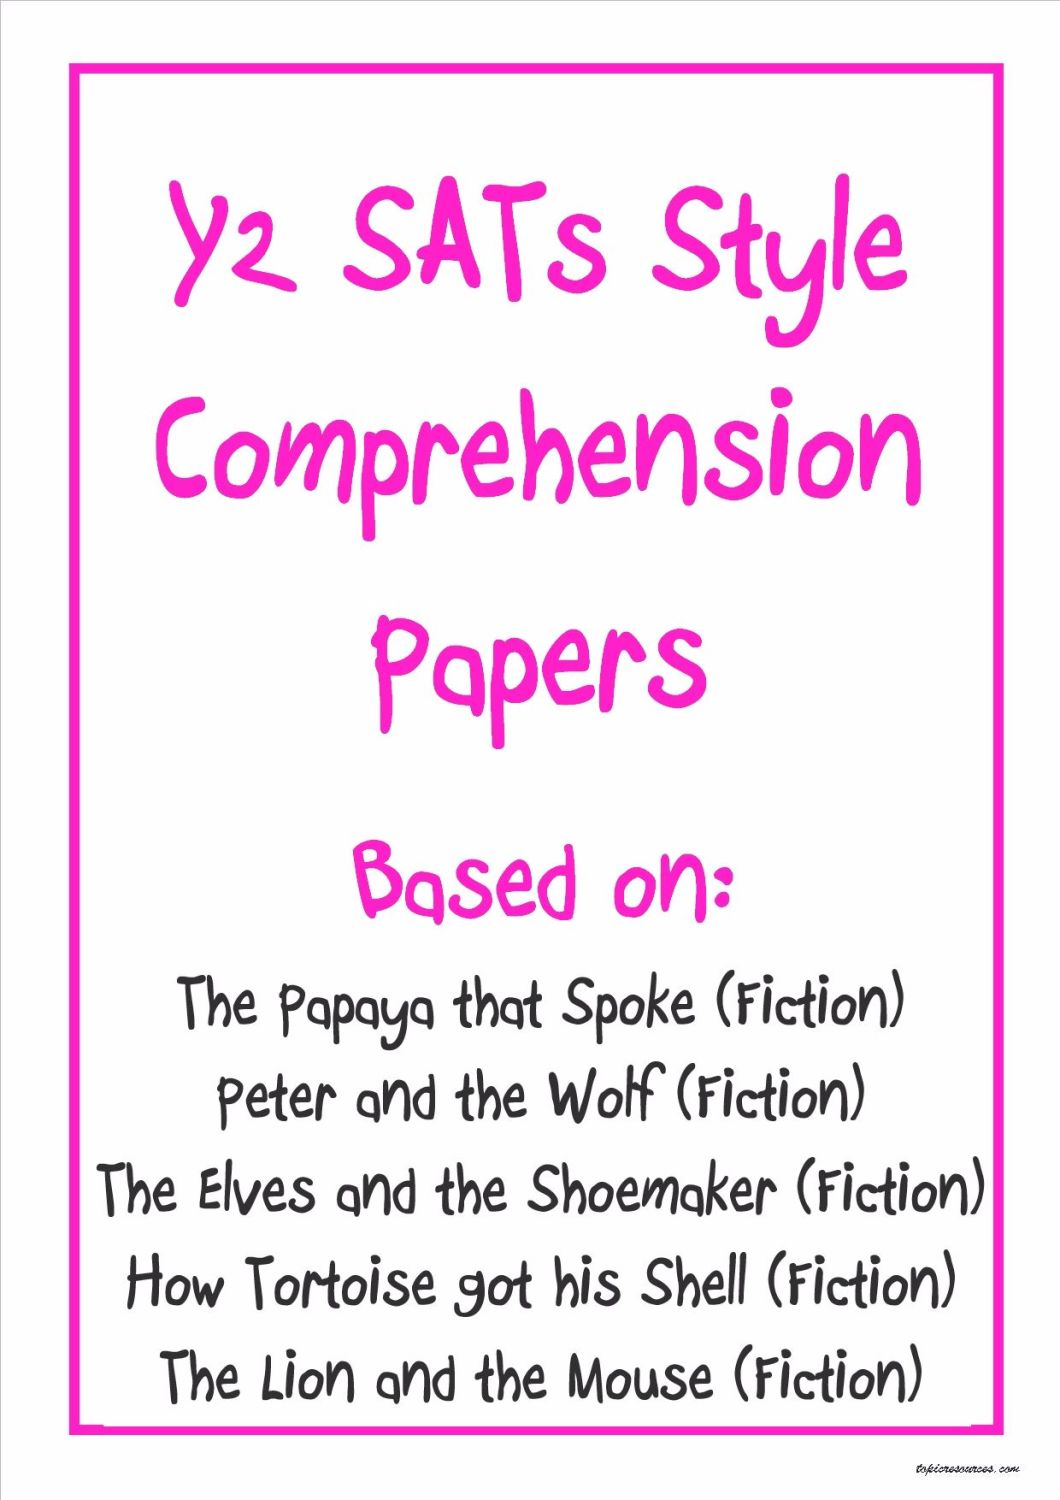 Y2 SATs-style comprehension papers based on well known stories.